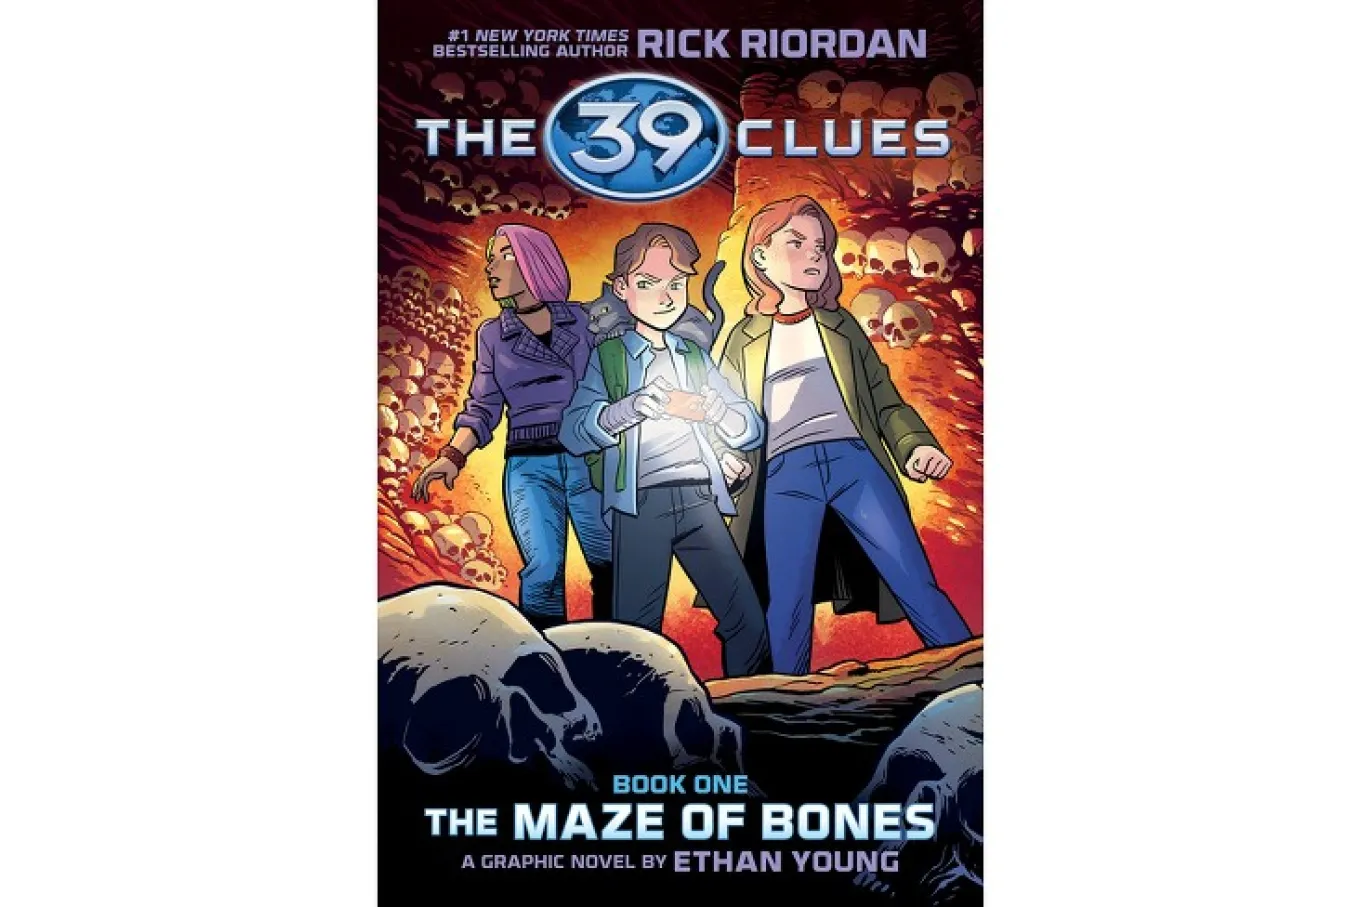 Cover to "The 39 Clues: Maze of Bones" graphic novel